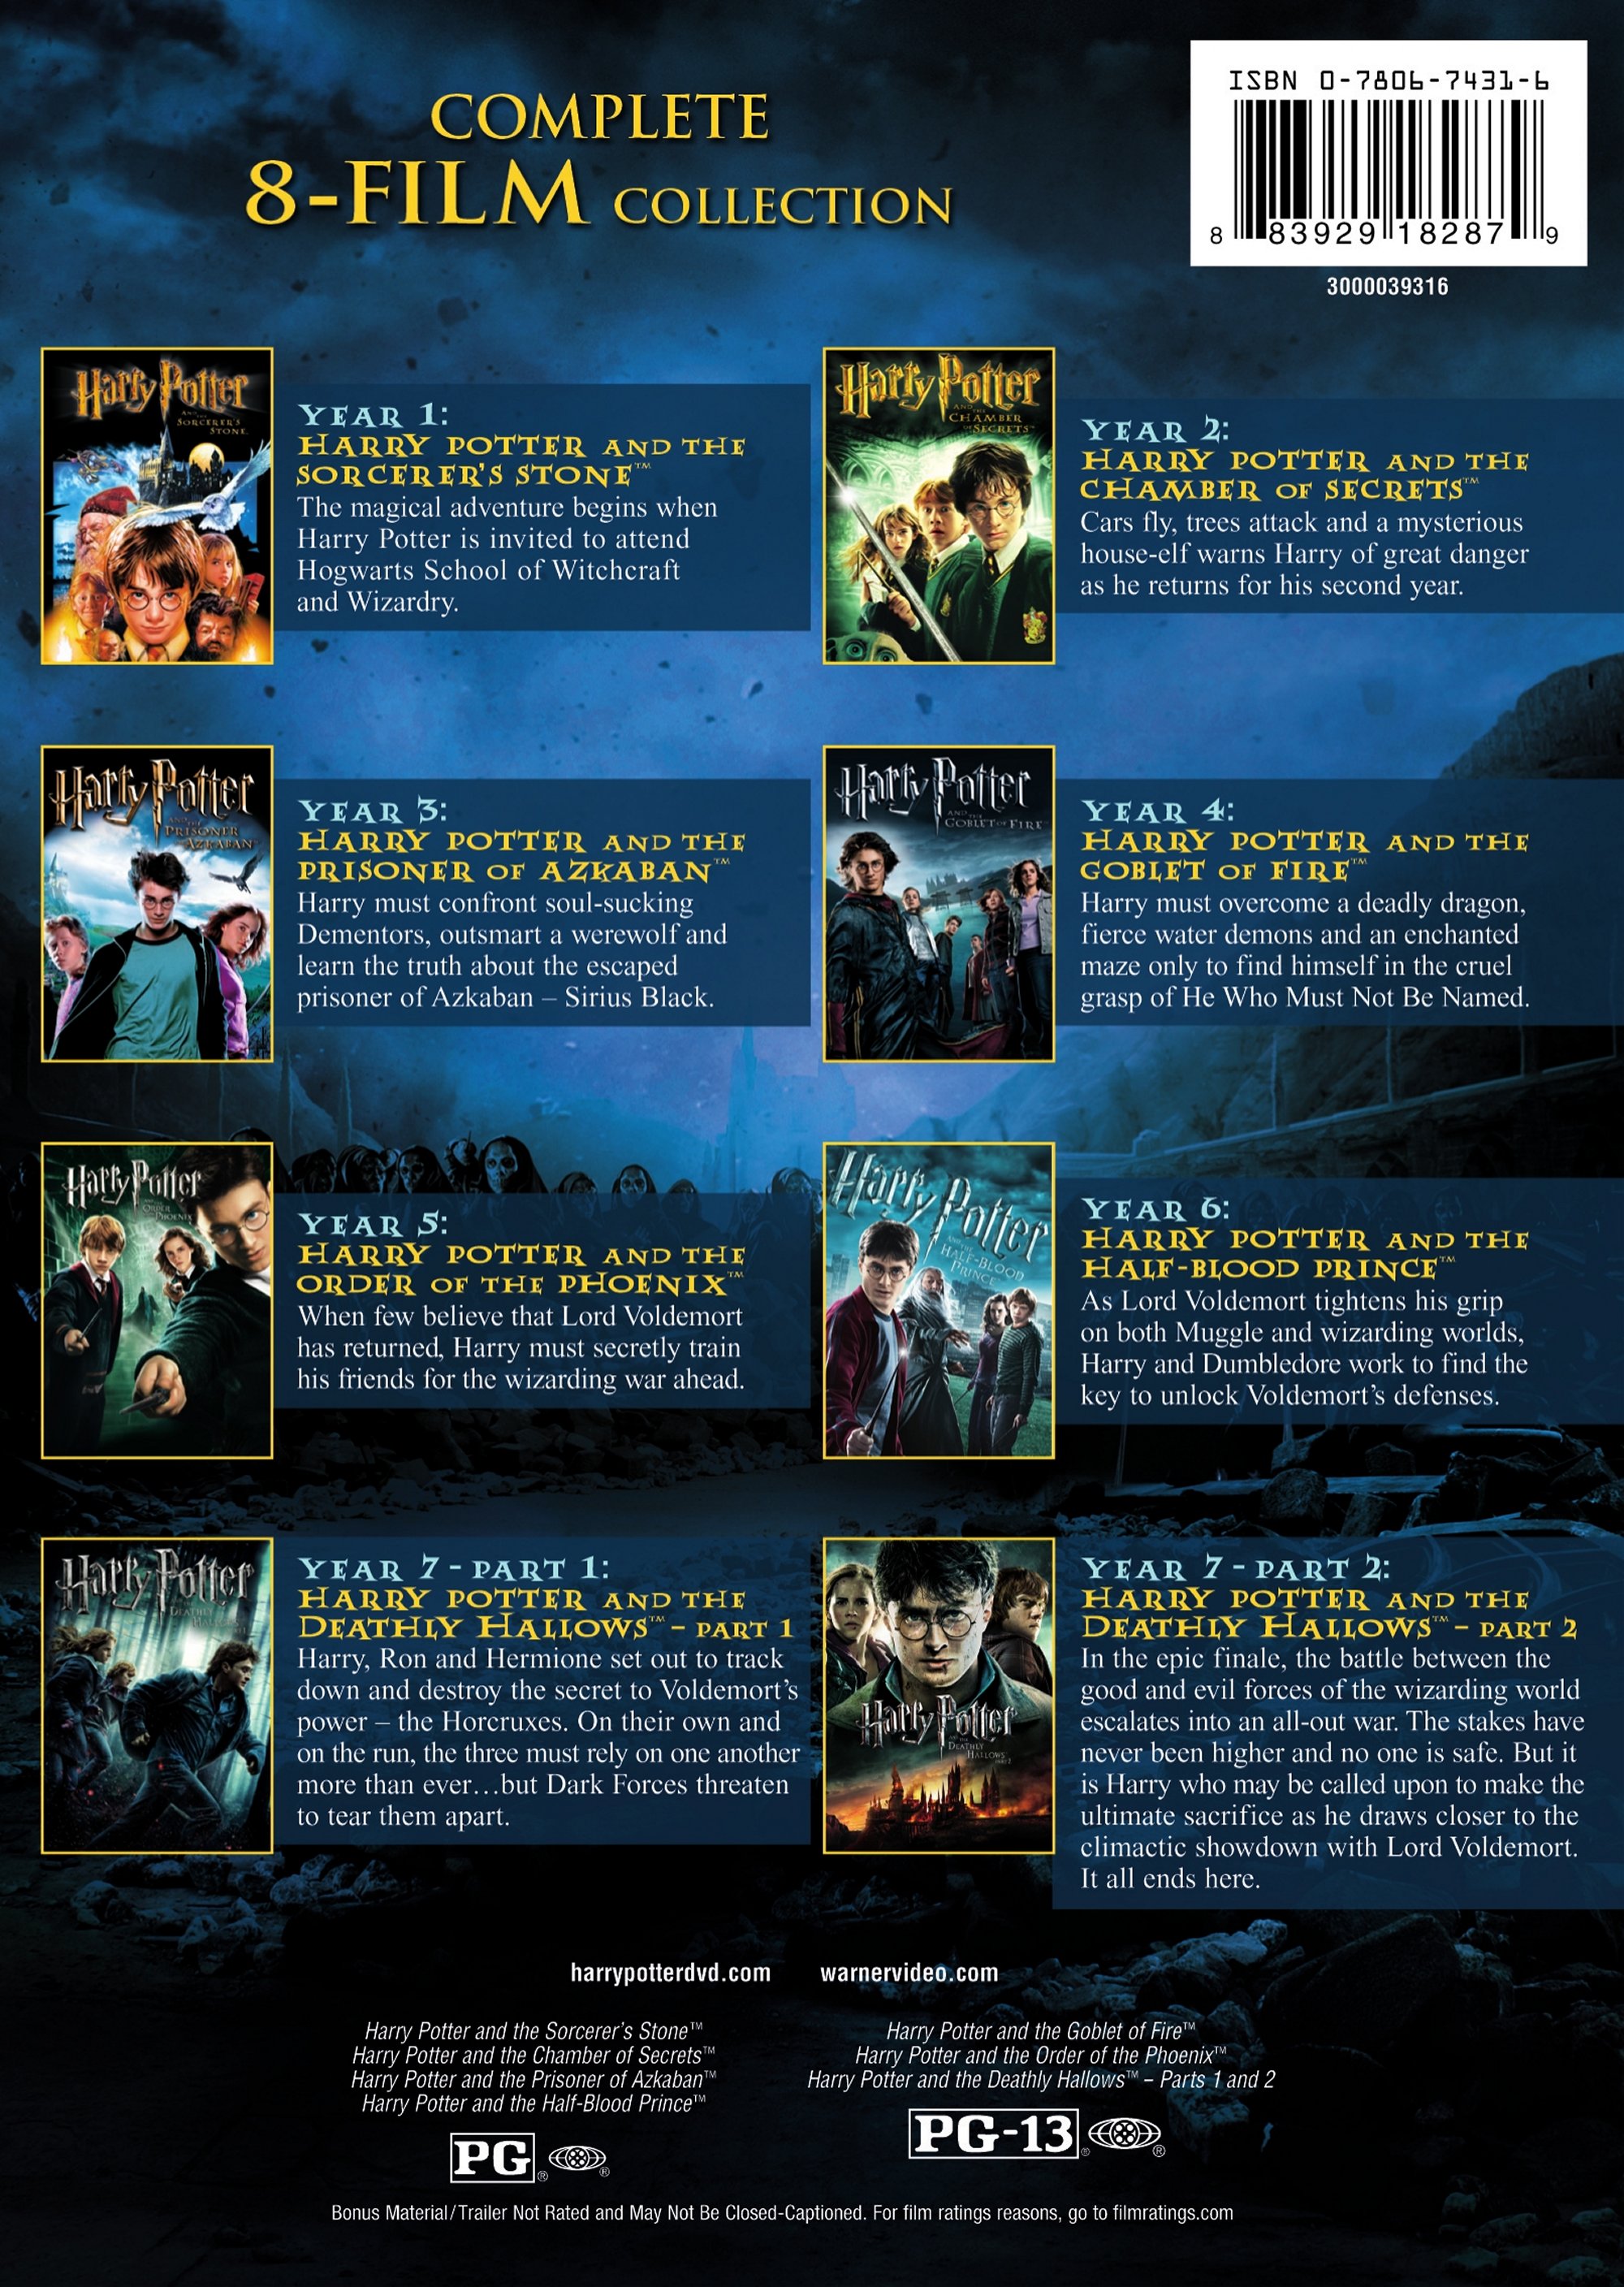 Harry Potter: Complete 8-Film Collection (DVD) - image 2 of 9